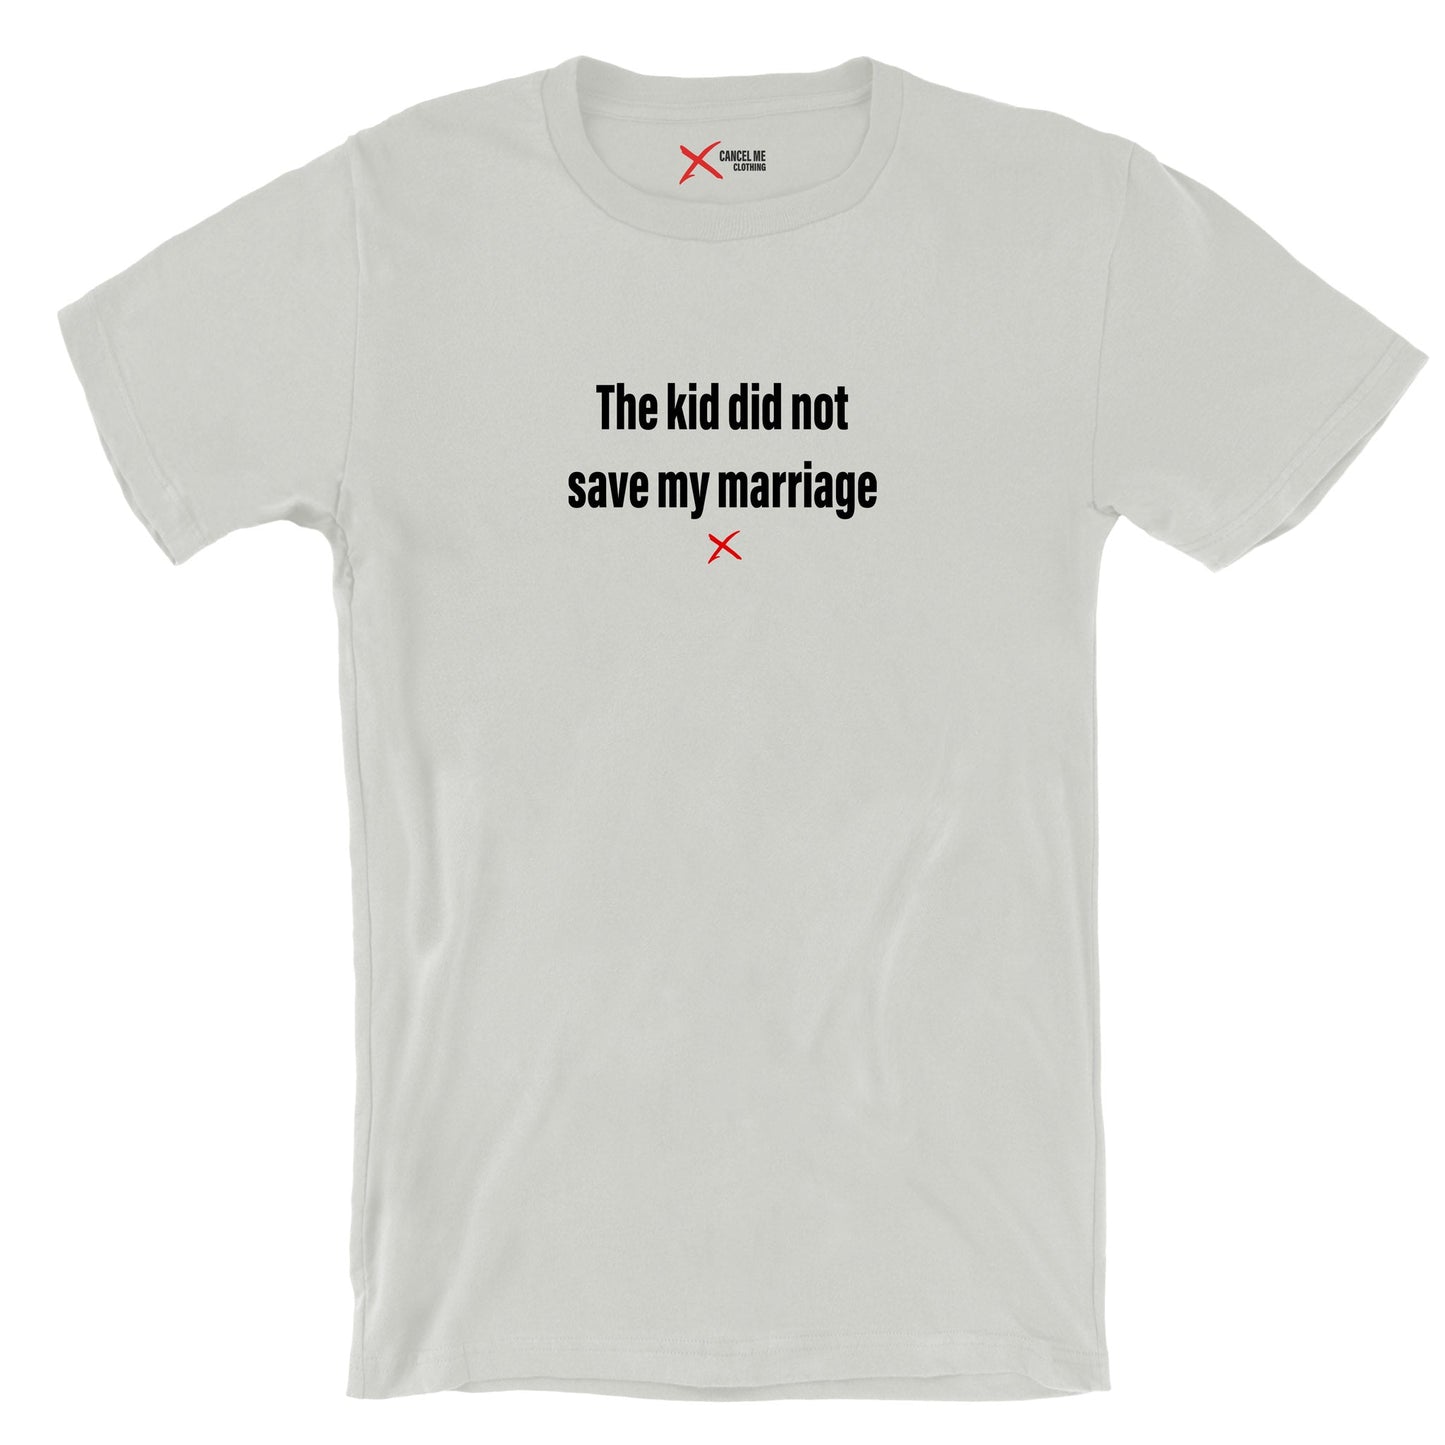 The kid did not save my marriage - Shirt